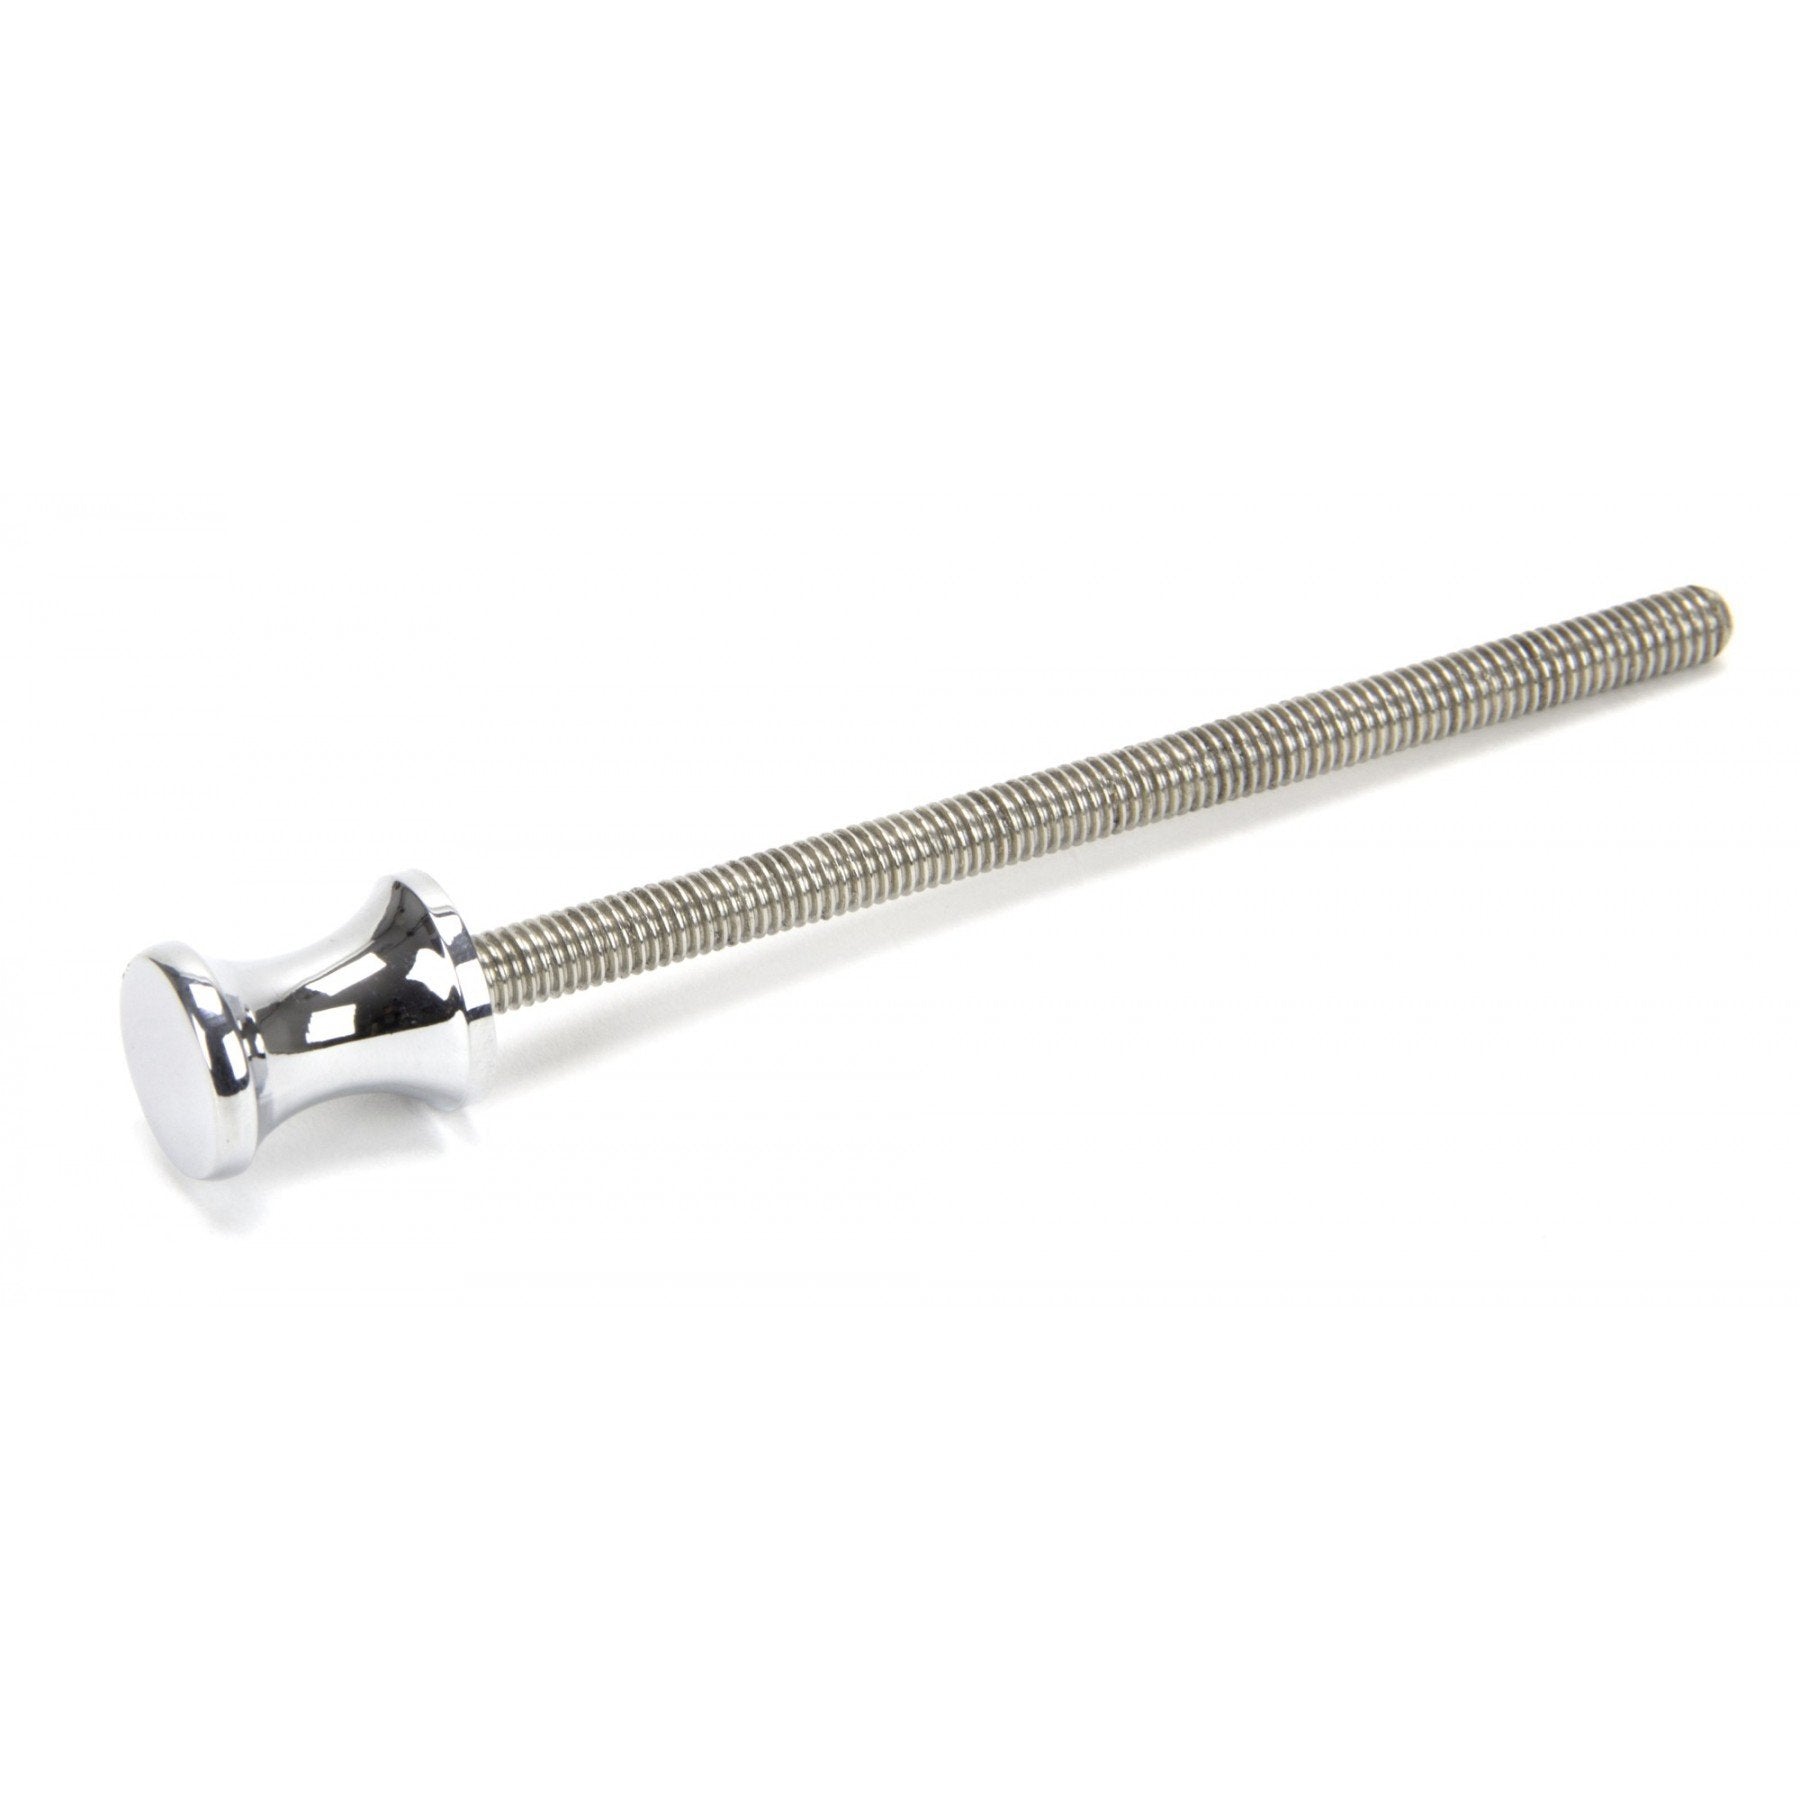 From the Anvil Polished Chrome ended SS M6 110mm Threaded Bar - No.42 Interiors